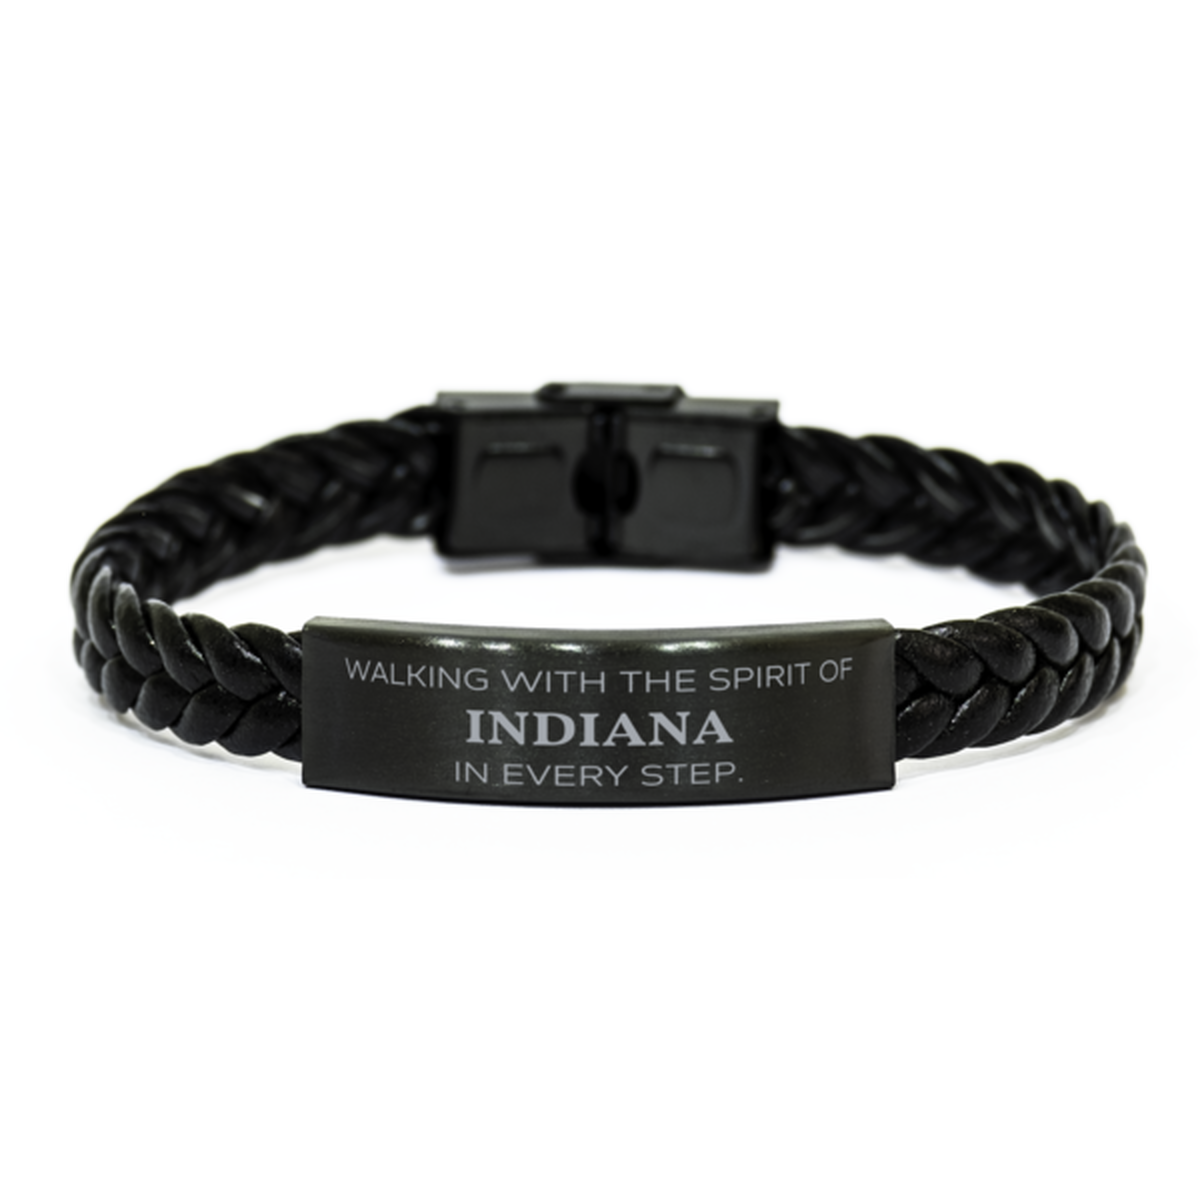 Indiana Gifts, Walking with the spirit, Love Indiana Birthday Christmas Braided Leather Bracelet For Indiana People, Men, Women, Friends